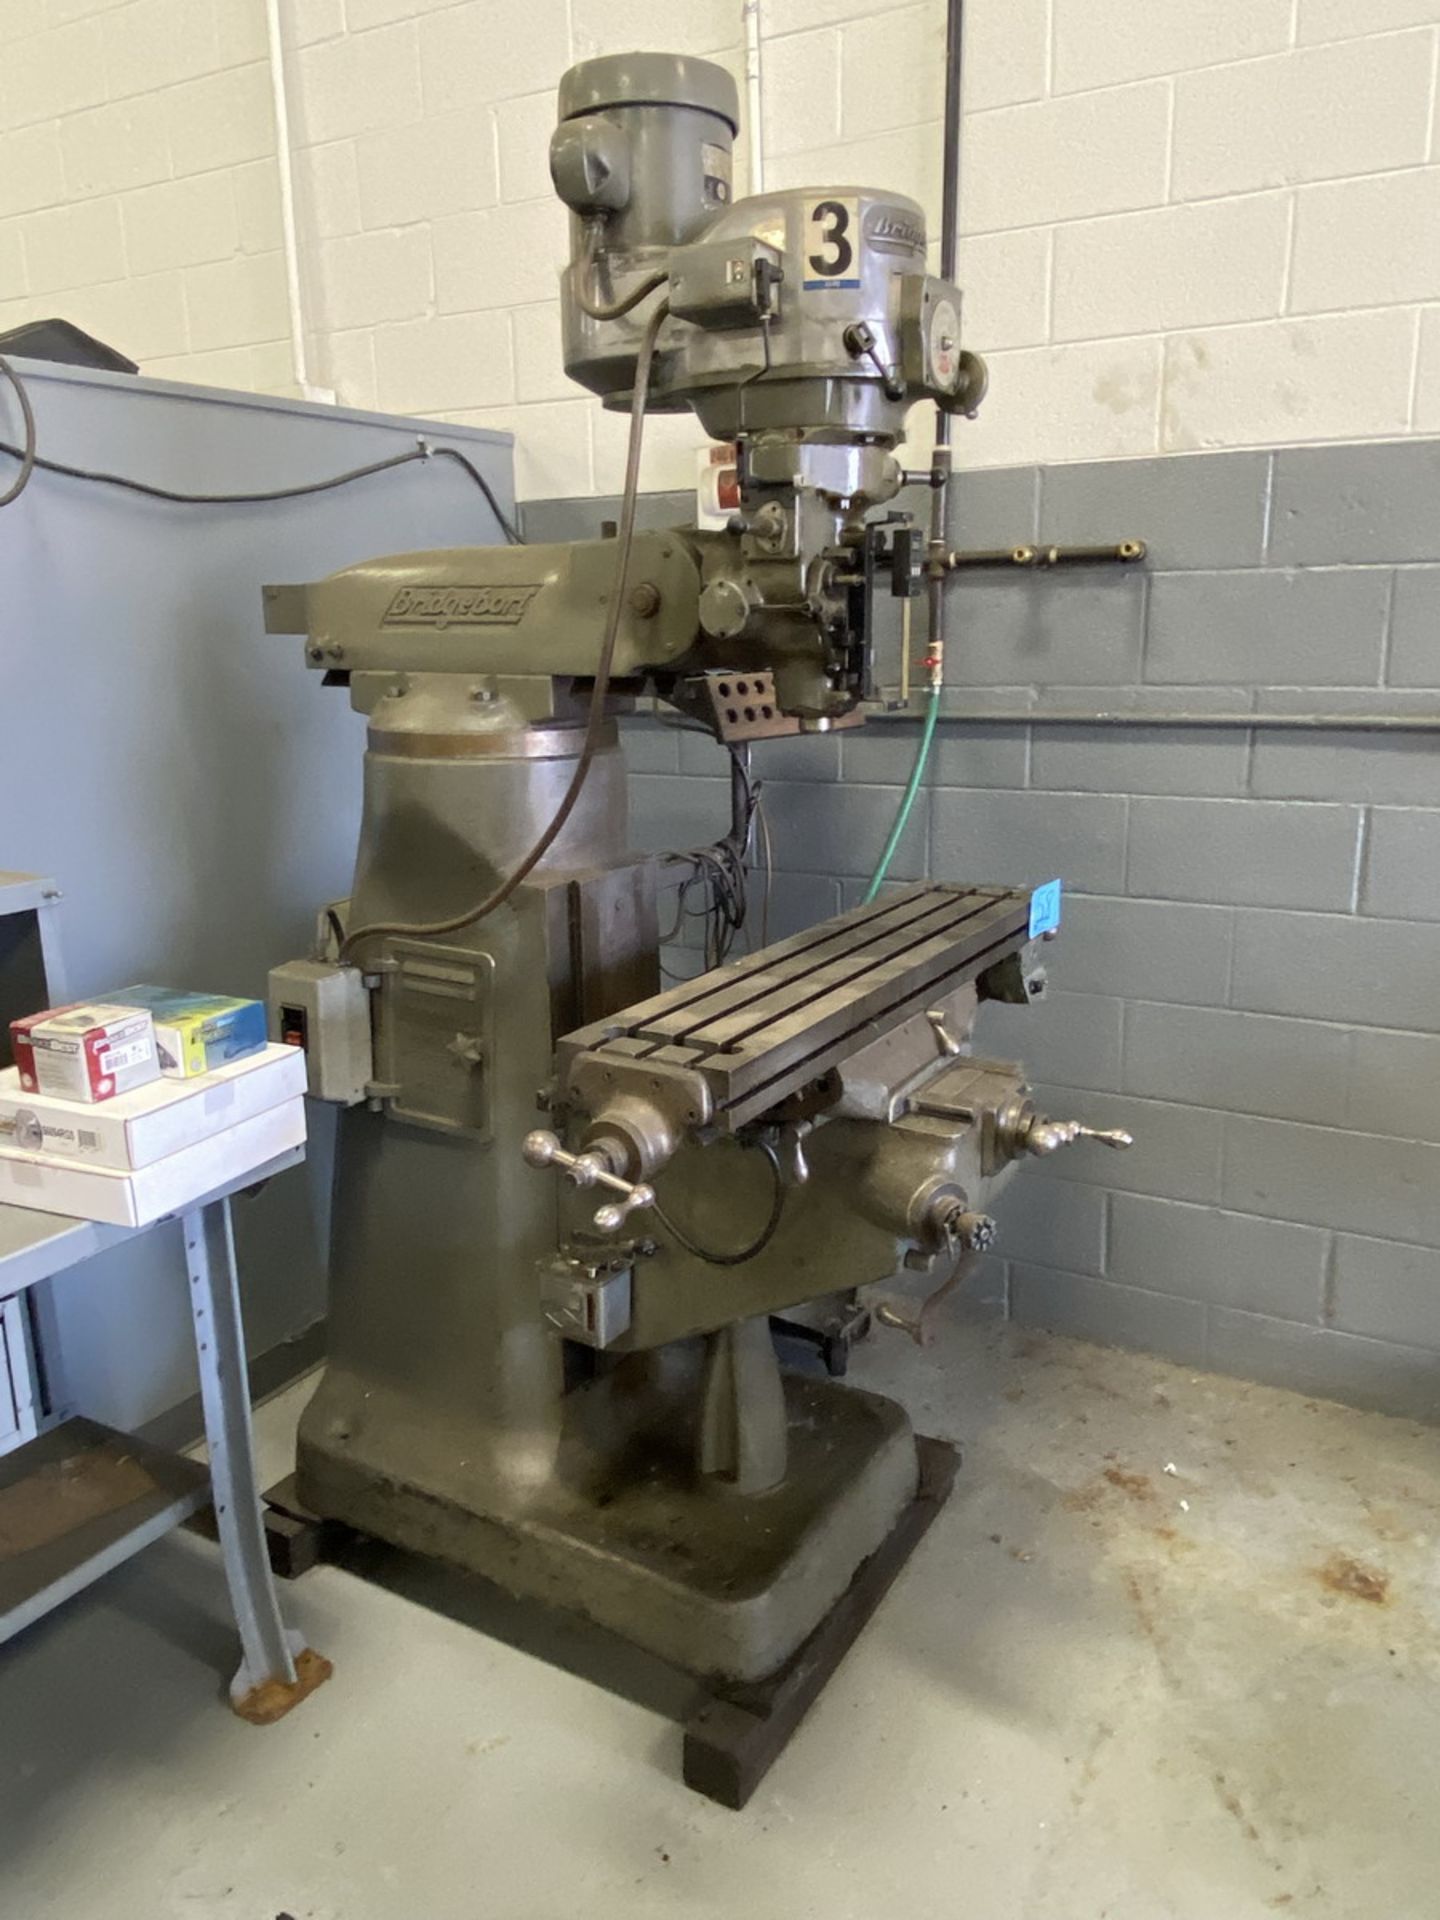 Bridgeport Vertical Milling Machine 9'' W x 42'' L T-Slotted Table - Image 2 of 11